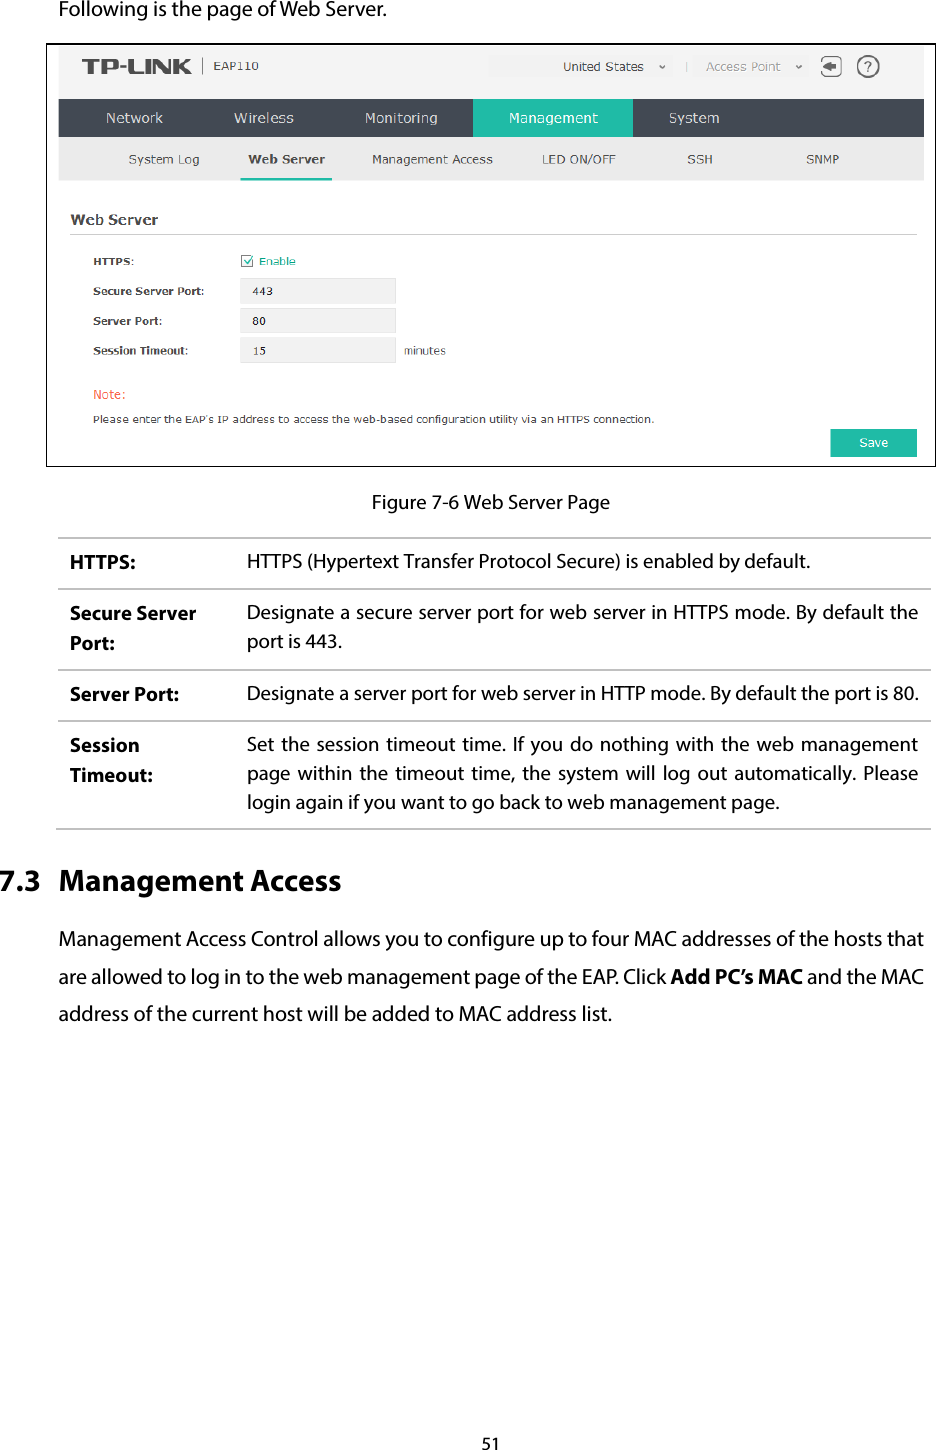 51  Following is the page of Web Server.  Figure 7-6 Web Server Page HTTPS:  HTTPS (Hypertext Transfer Protocol Secure) is enabled by default. Secure Server Port: Designate a secure server port for web server in HTTPS mode. By default the port is 443. Server Port:  Designate a server port for web server in HTTP mode. By default the port is 80. Session Timeout: Set the session timeout time. If you do nothing with the web management page within the timeout time, the system will log out automatically. Please login again if you want to go back to web management page. 7.3 Management Access Management Access Control allows you to configure up to four MAC addresses of the hosts that are allowed to log in to the web management page of the EAP. Click Add PC’s MAC and the MAC address of the current host will be added to MAC address list. 